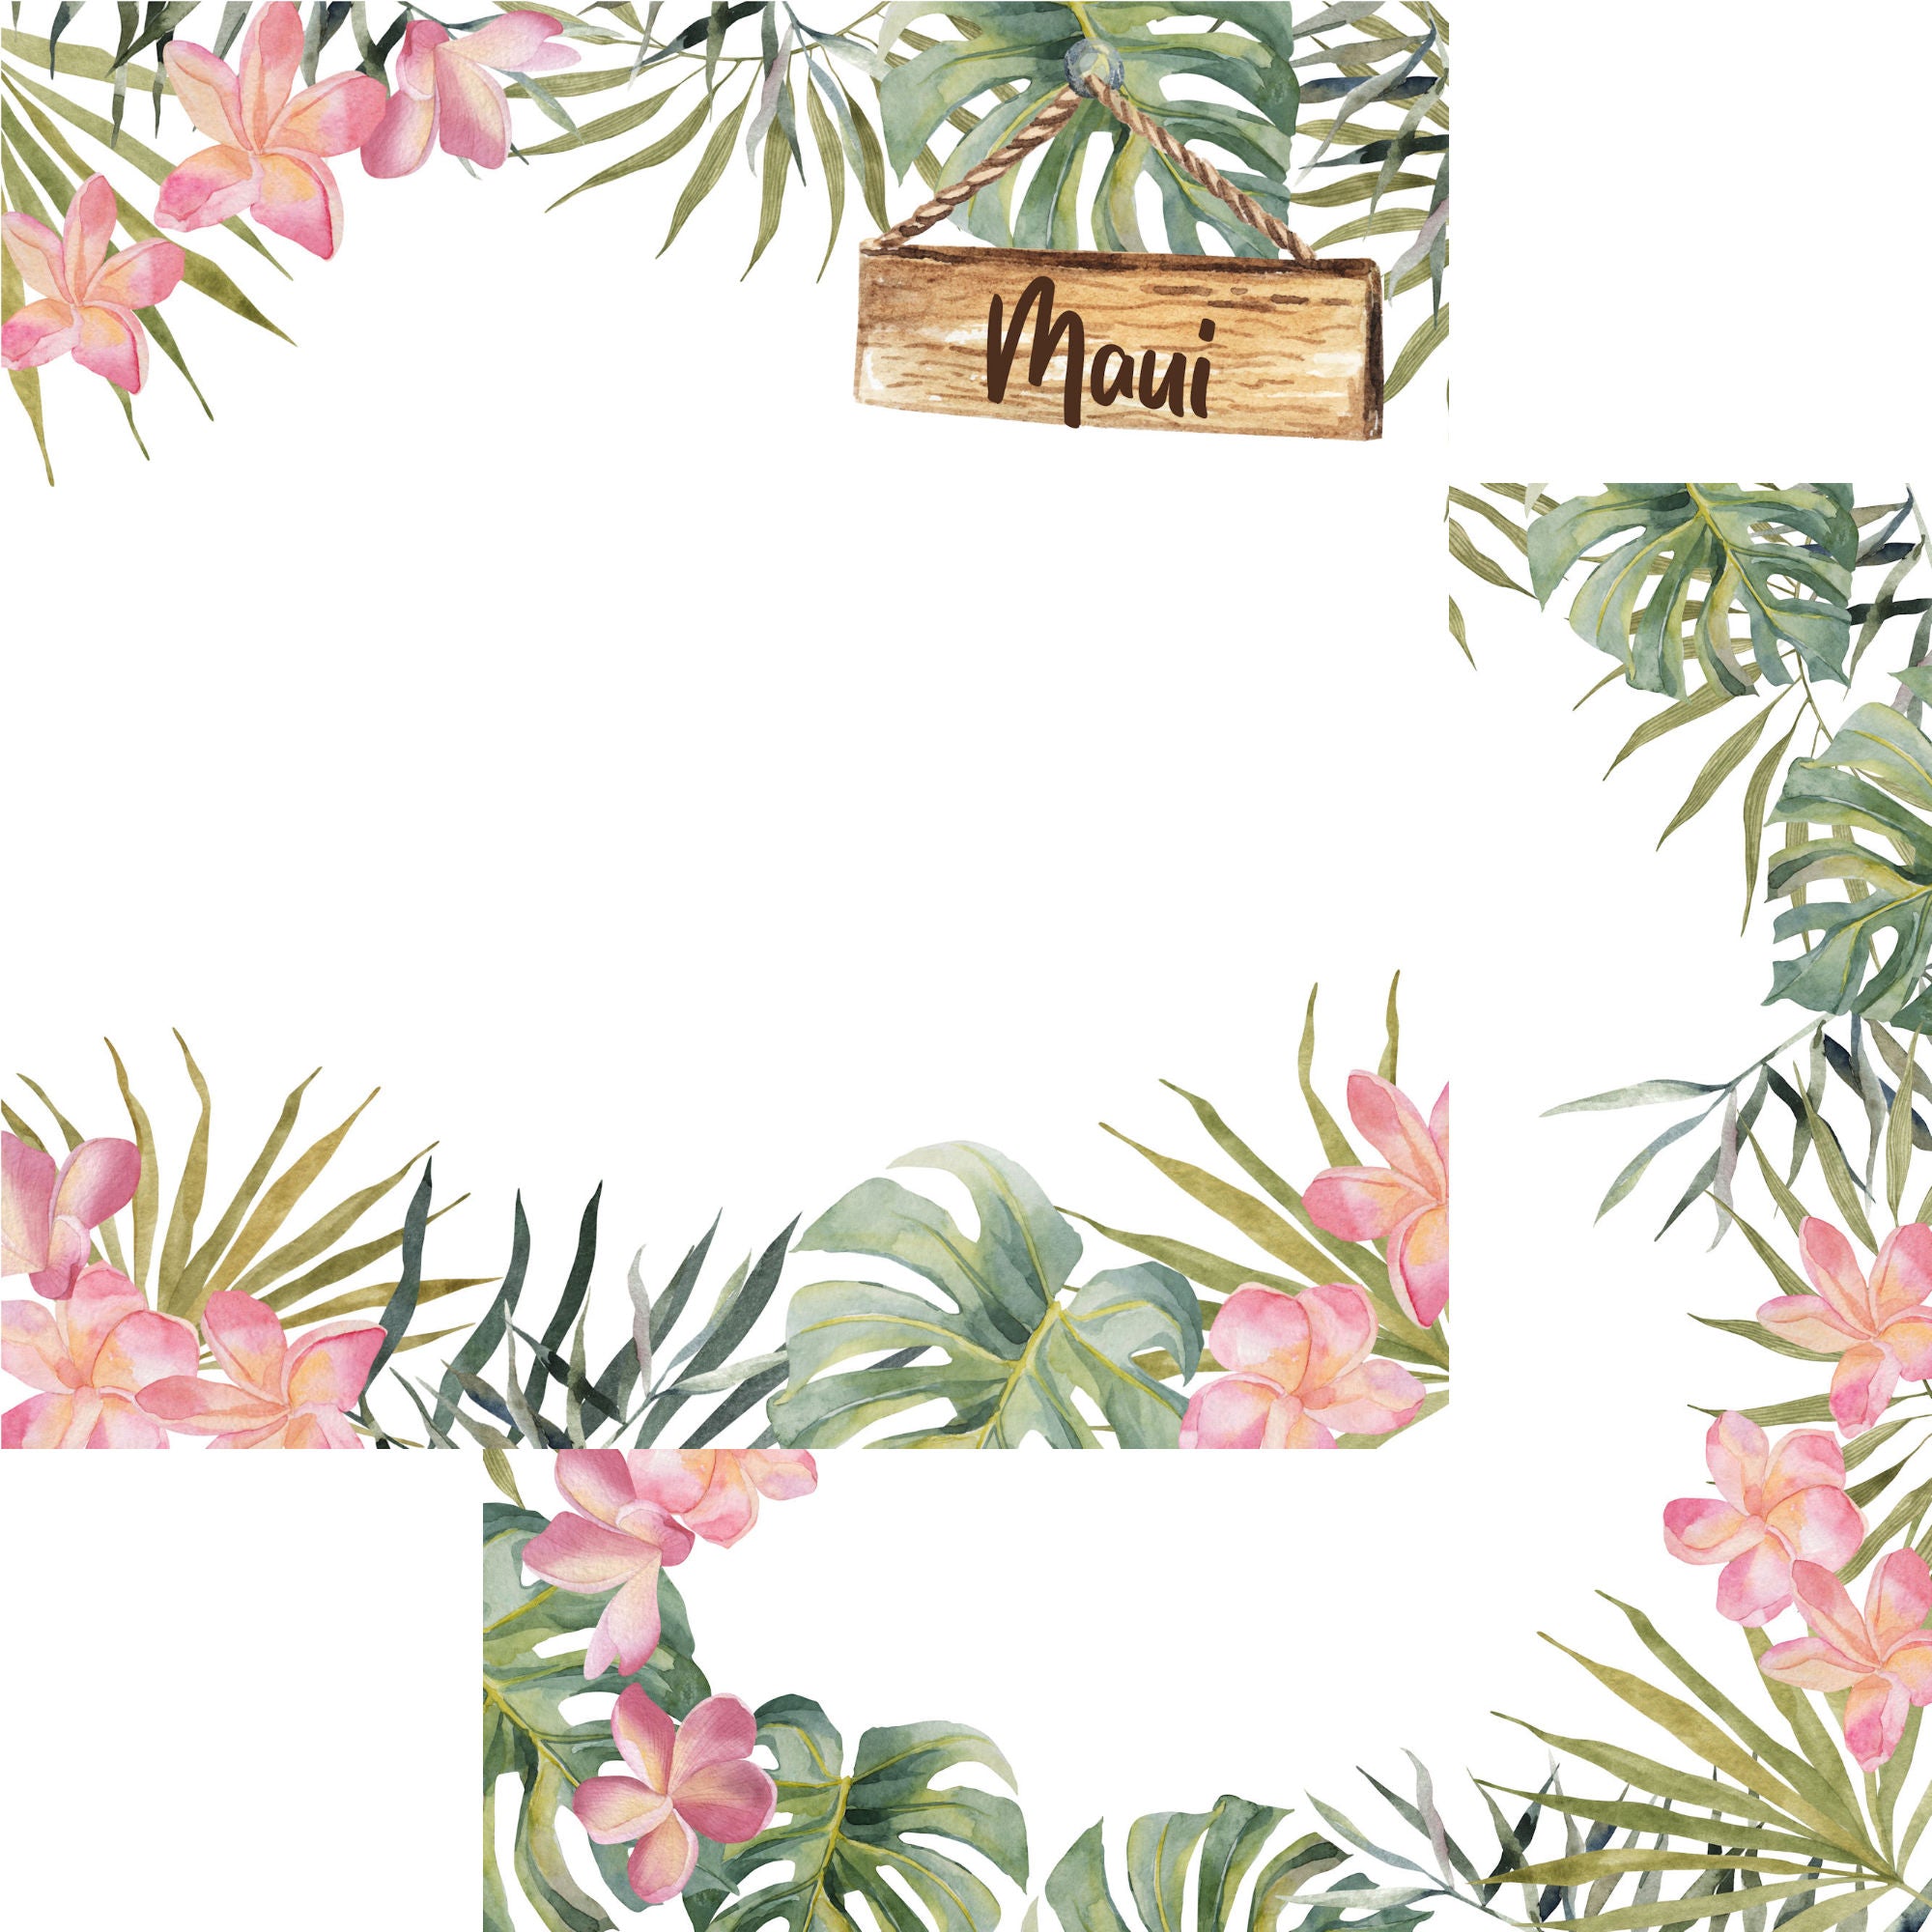 Tropical Paradise Collection Maui 12 x 12 Double-Sided Scrapbook Paper by SSC Designs